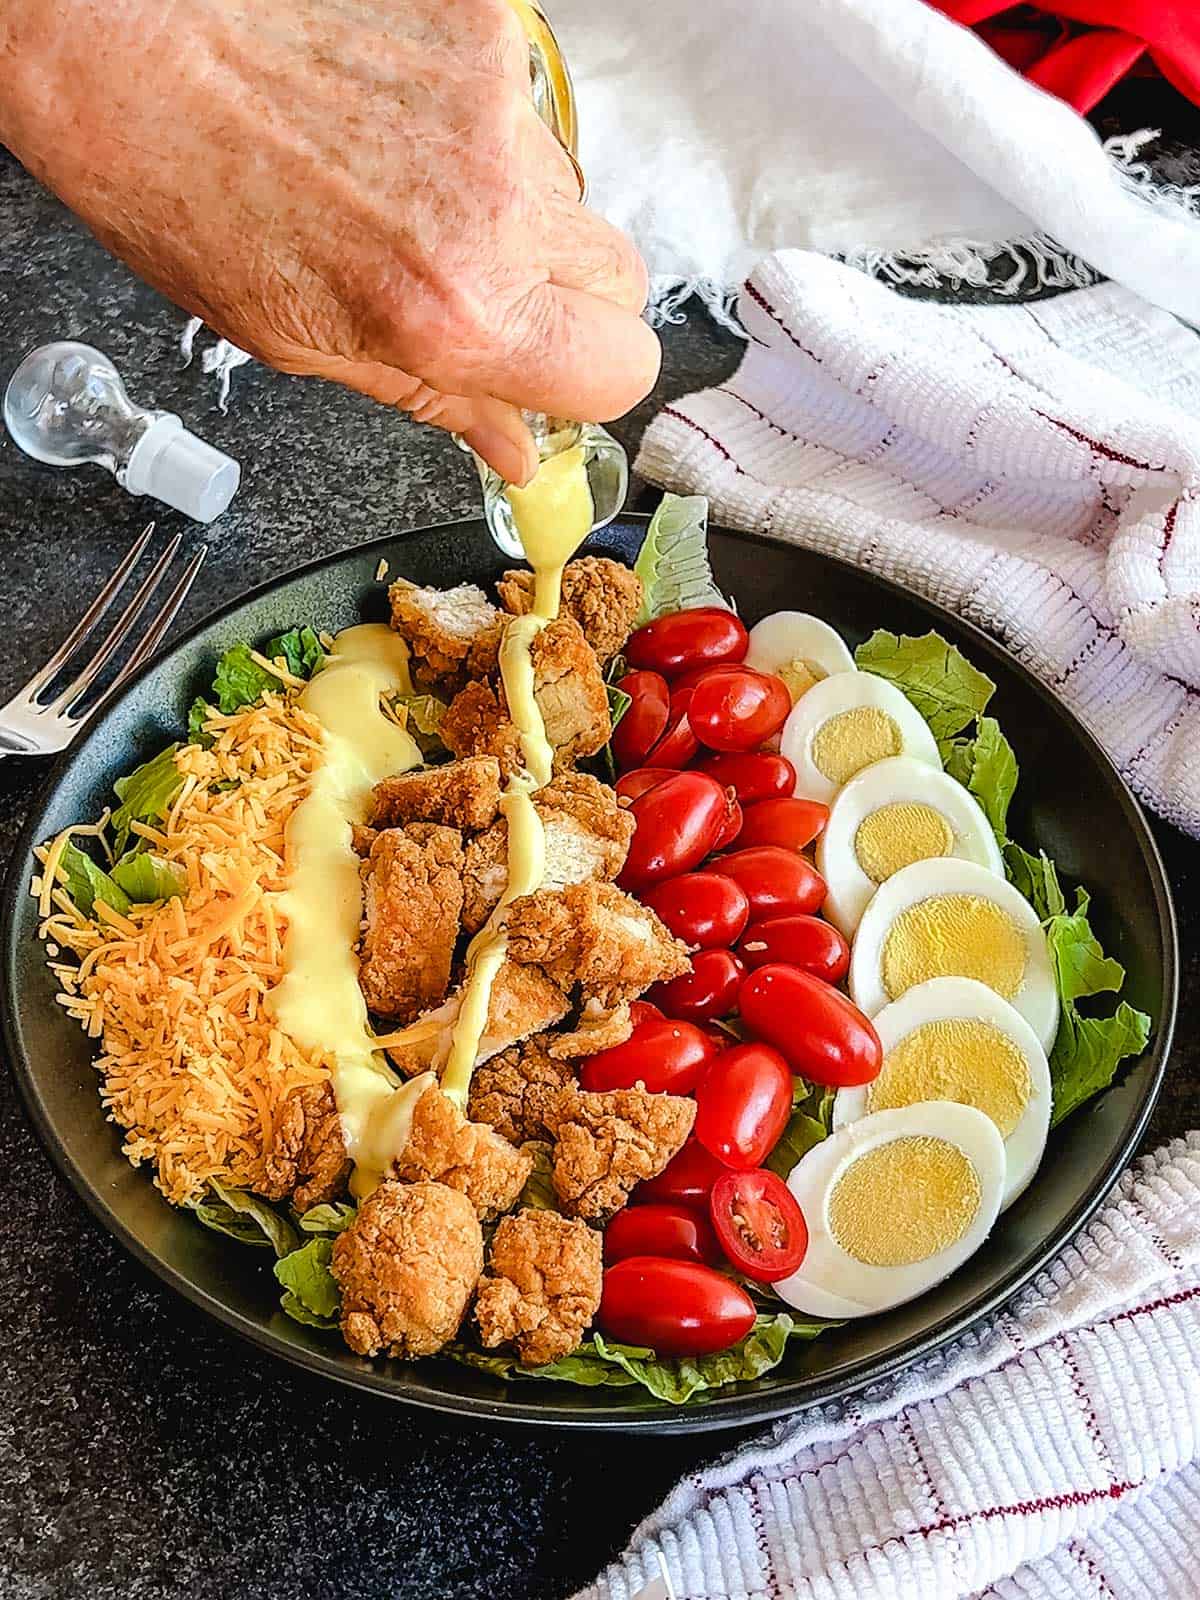 Pouring honey mustard dressing on the Southern Fried Chicken Salad.